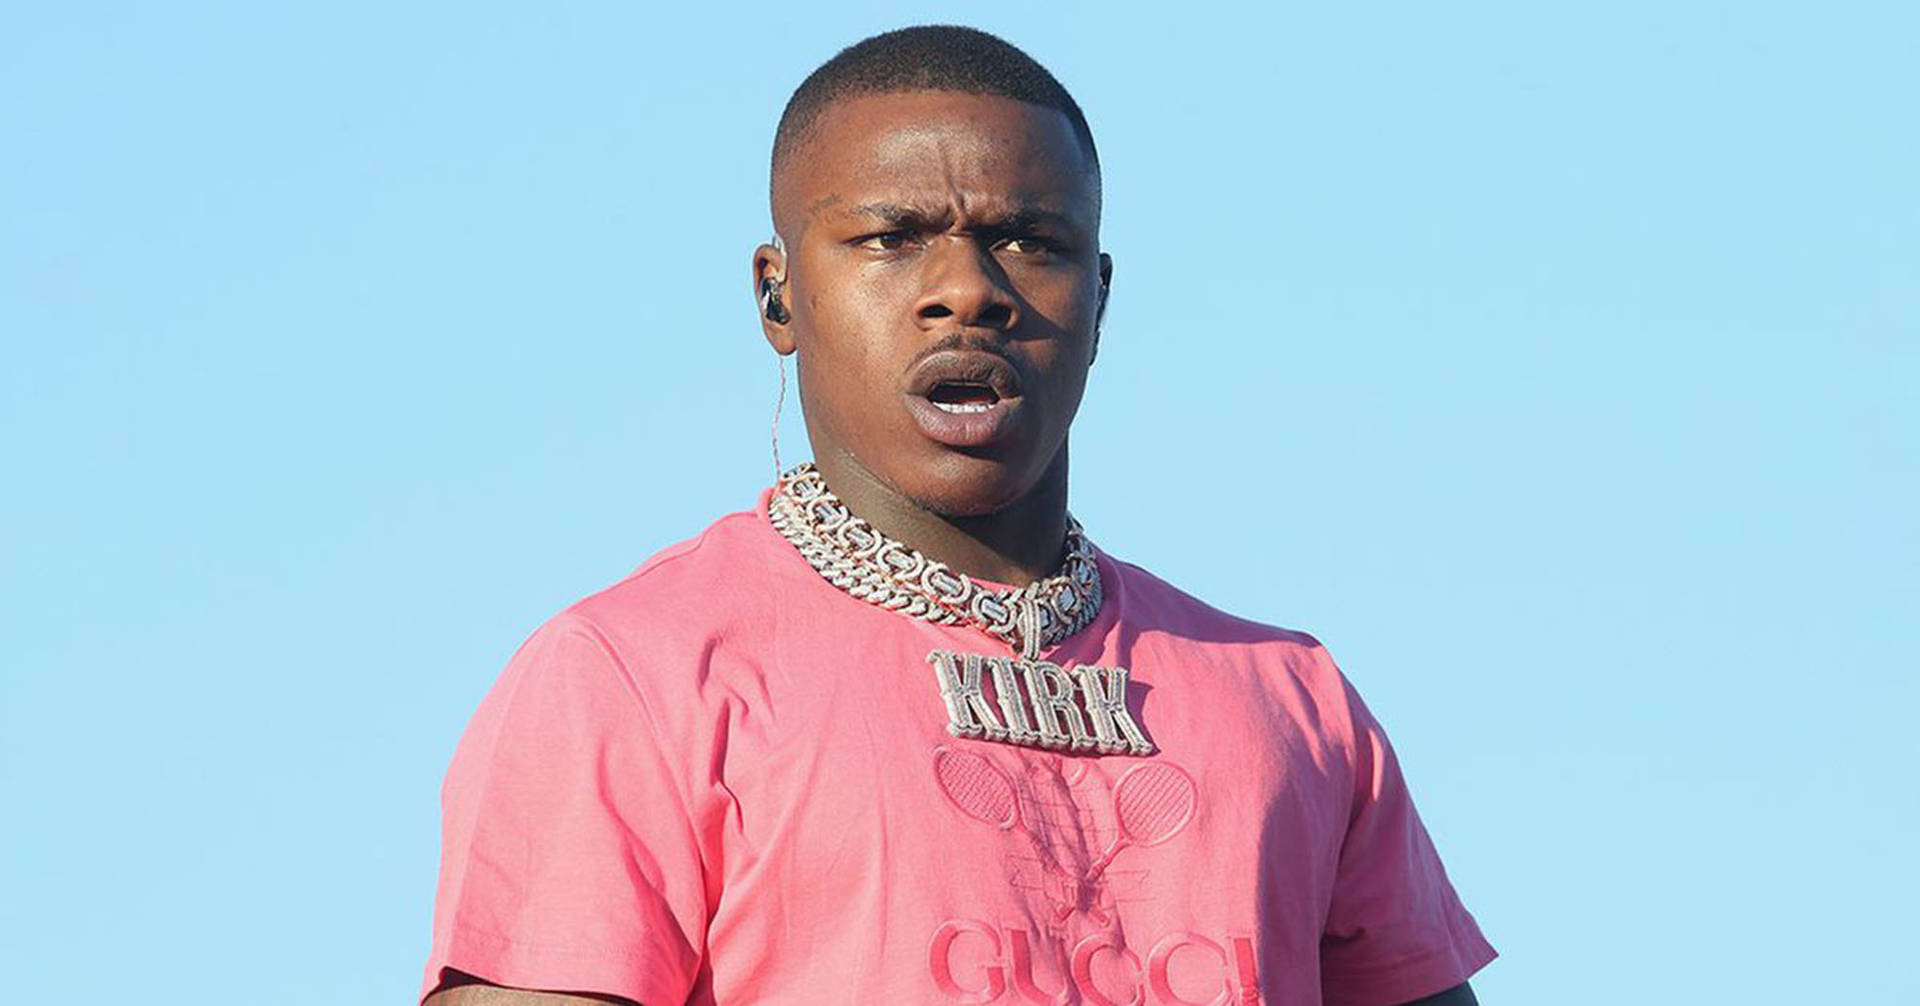 Dababy In Pink Shirt Performance Outfit Background